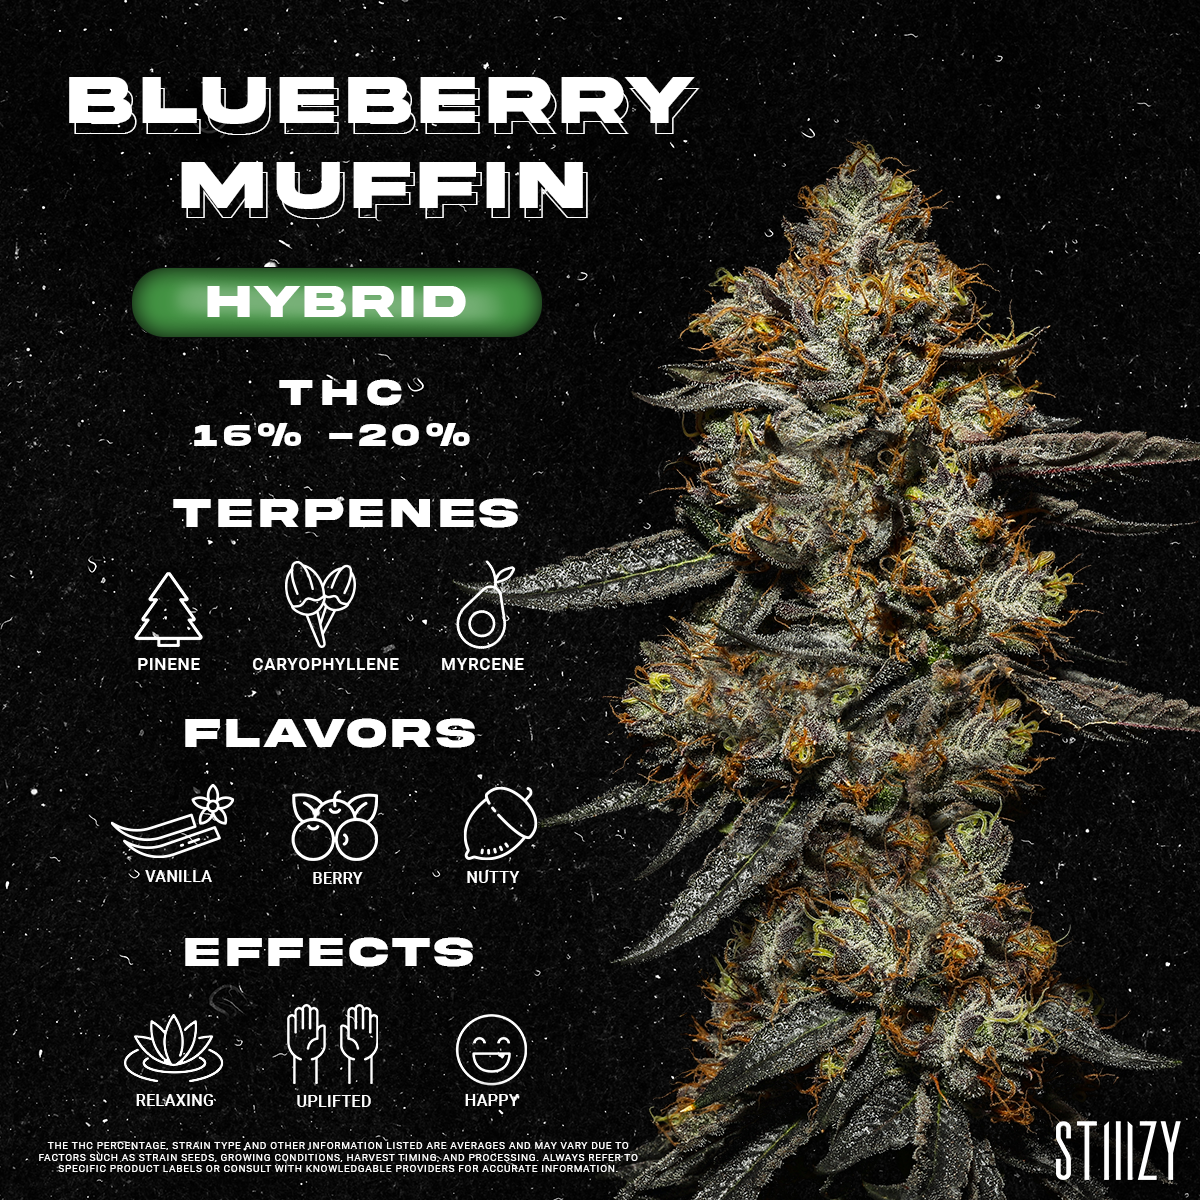 Blueberry Muffin Strain - Infographic